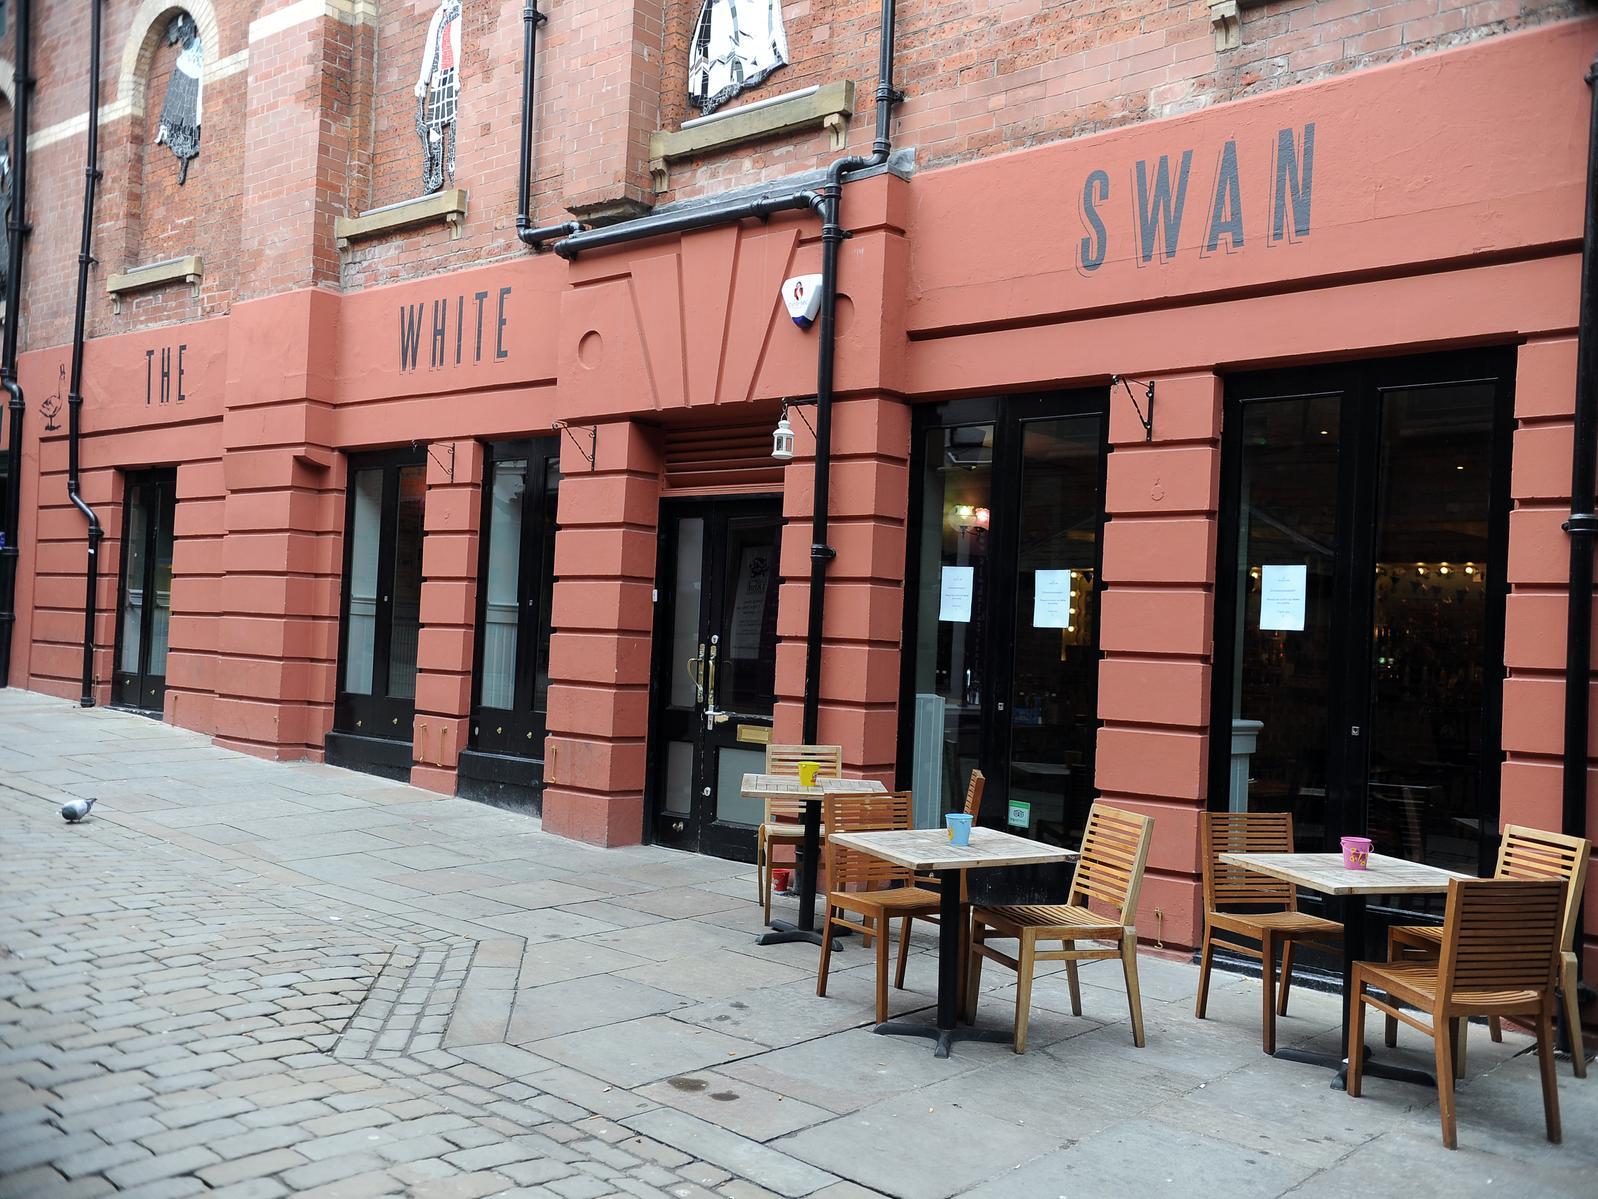 The White Swan, tucked up an alley near off Brigatte and opposite the City Varieties, came fourth on the list.(2013 pic)